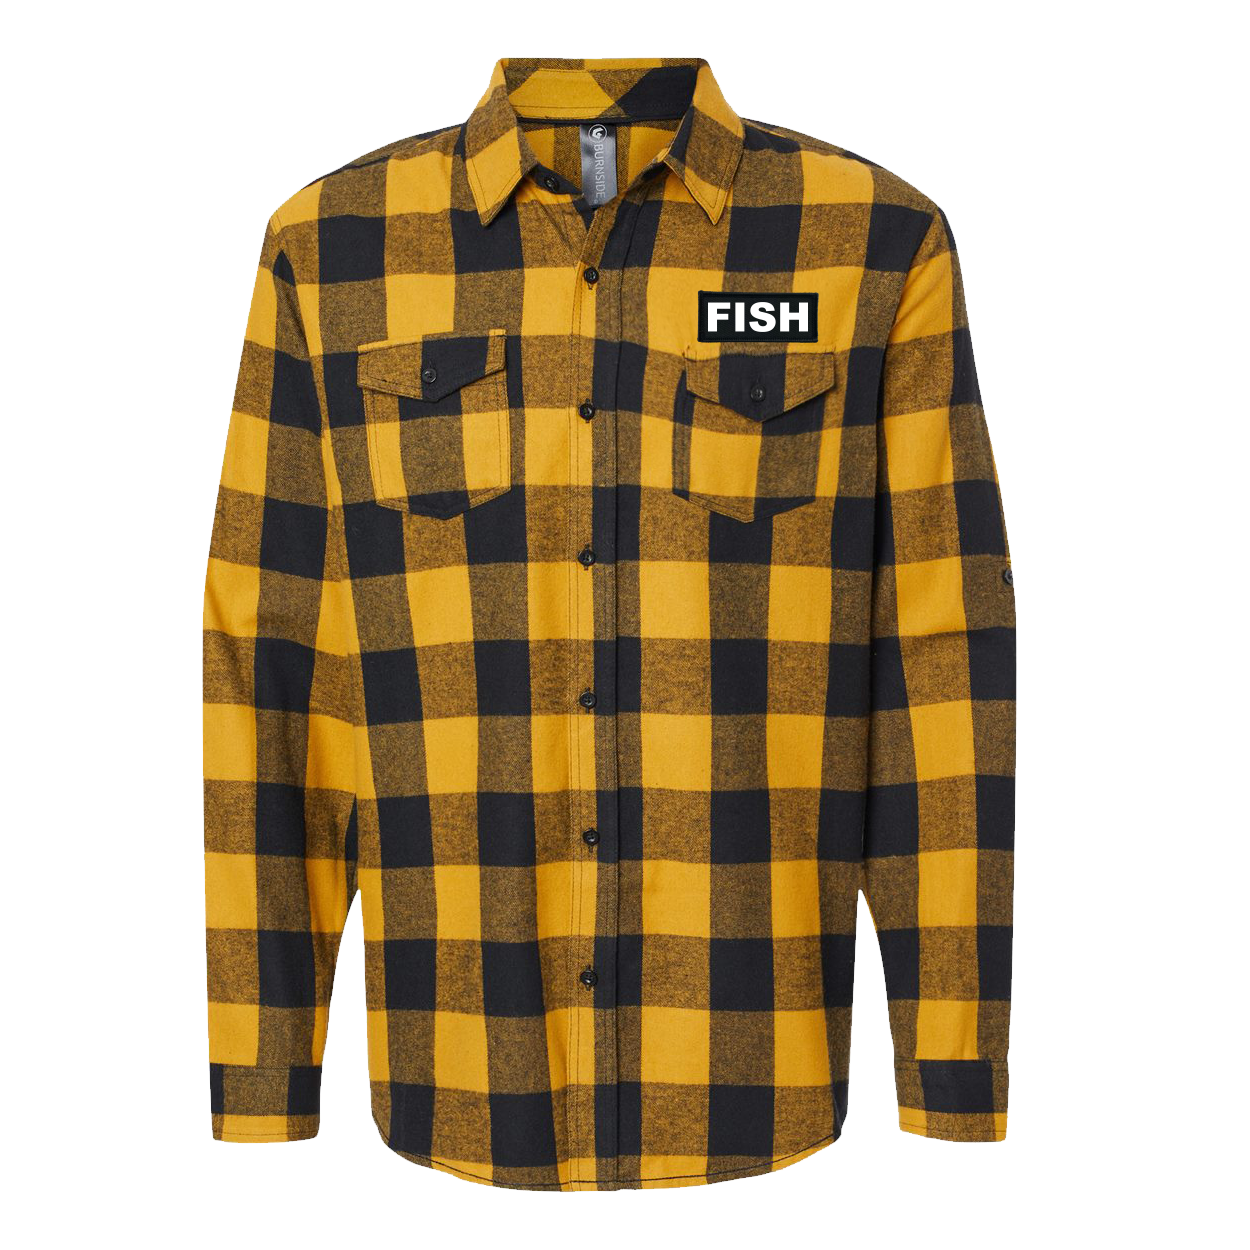 Fish Brand Logo Night Out Rectangle Woven Patch Flannel Shirt Black/Gold